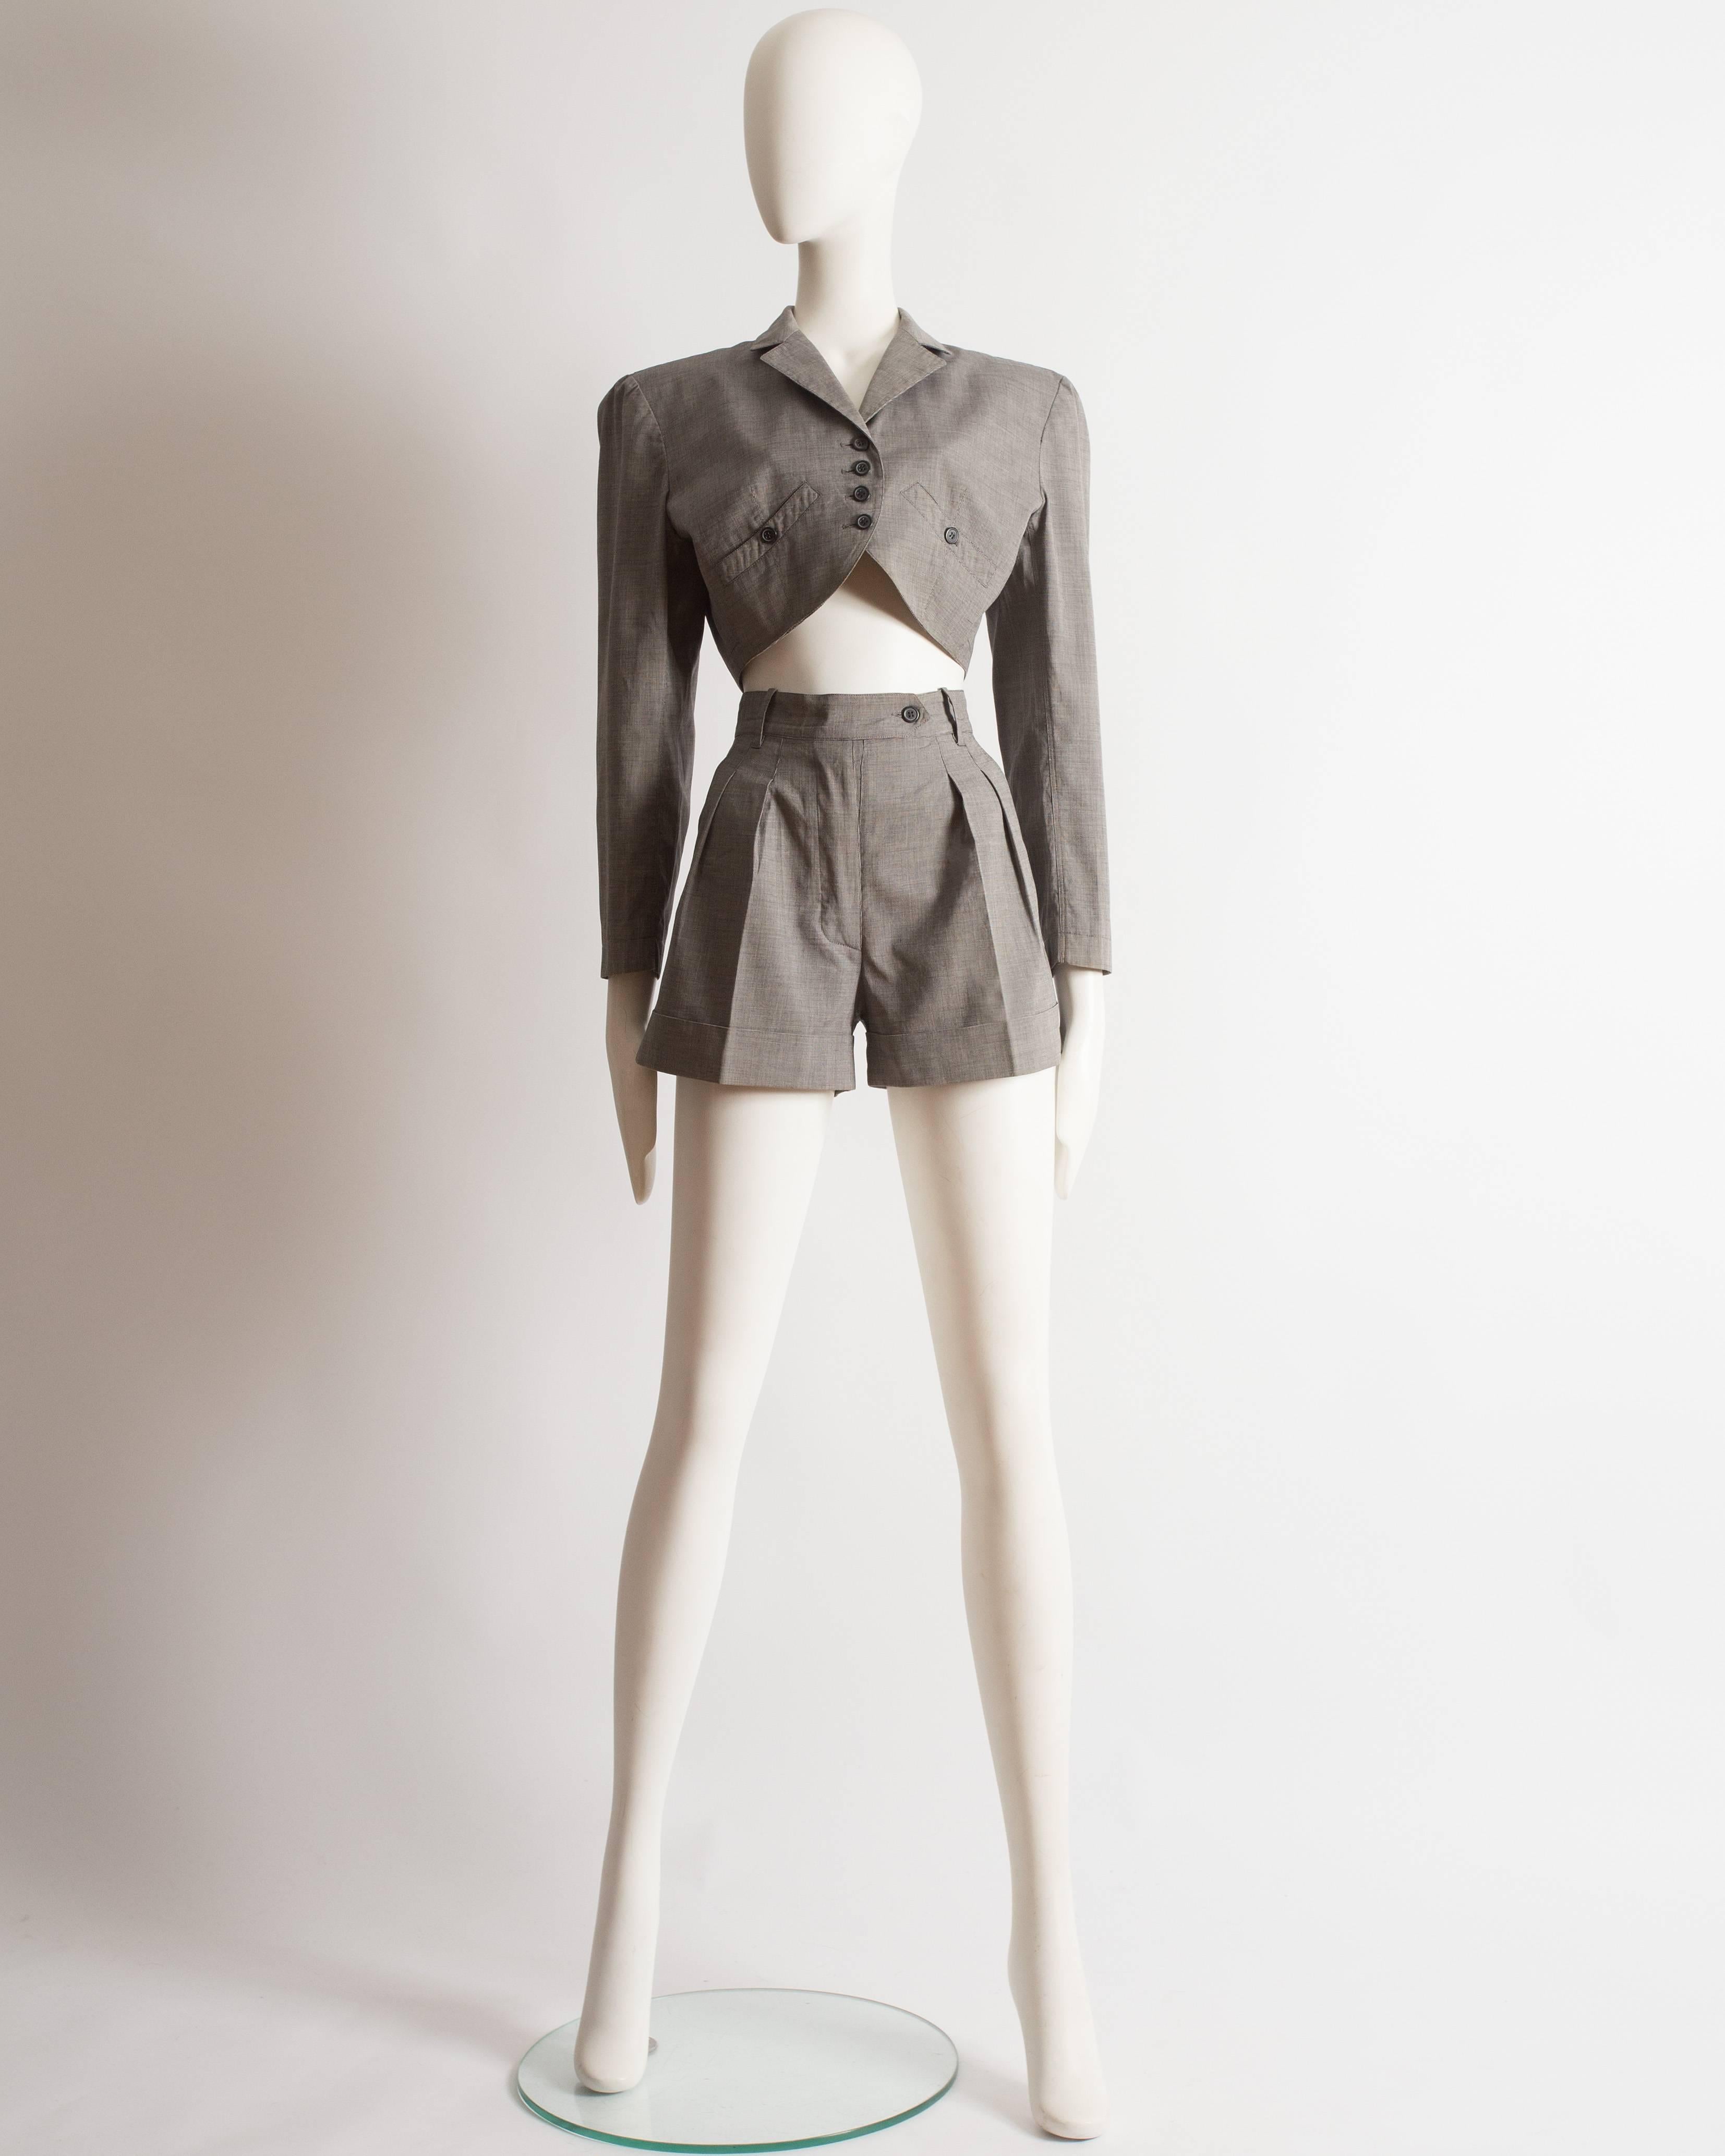 Introducing an iconic Azzedine Alaia suit from the spring-summer 1988 collection. This suit showcases the legendary designer's impeccable tailoring and timeless style.

Constructed in grey cotton, the suit exudes sophistication and versatility. The